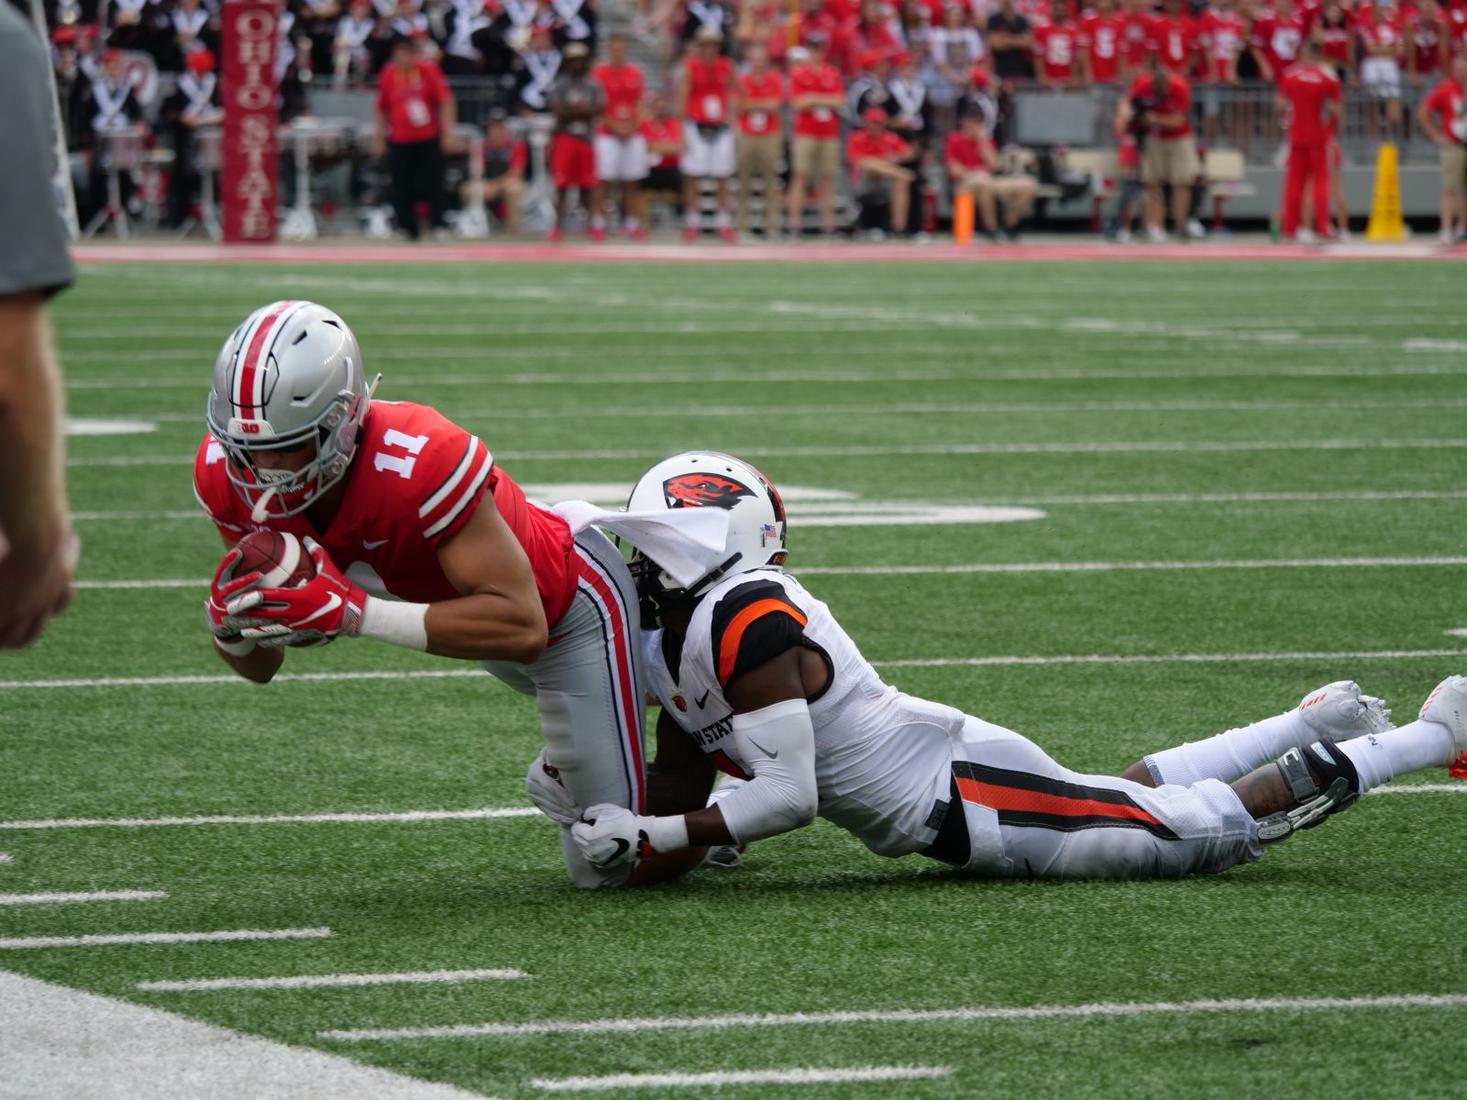 Ohio State Opens Season with Impressive Offensive Display, Downing Oregon State, 77-31